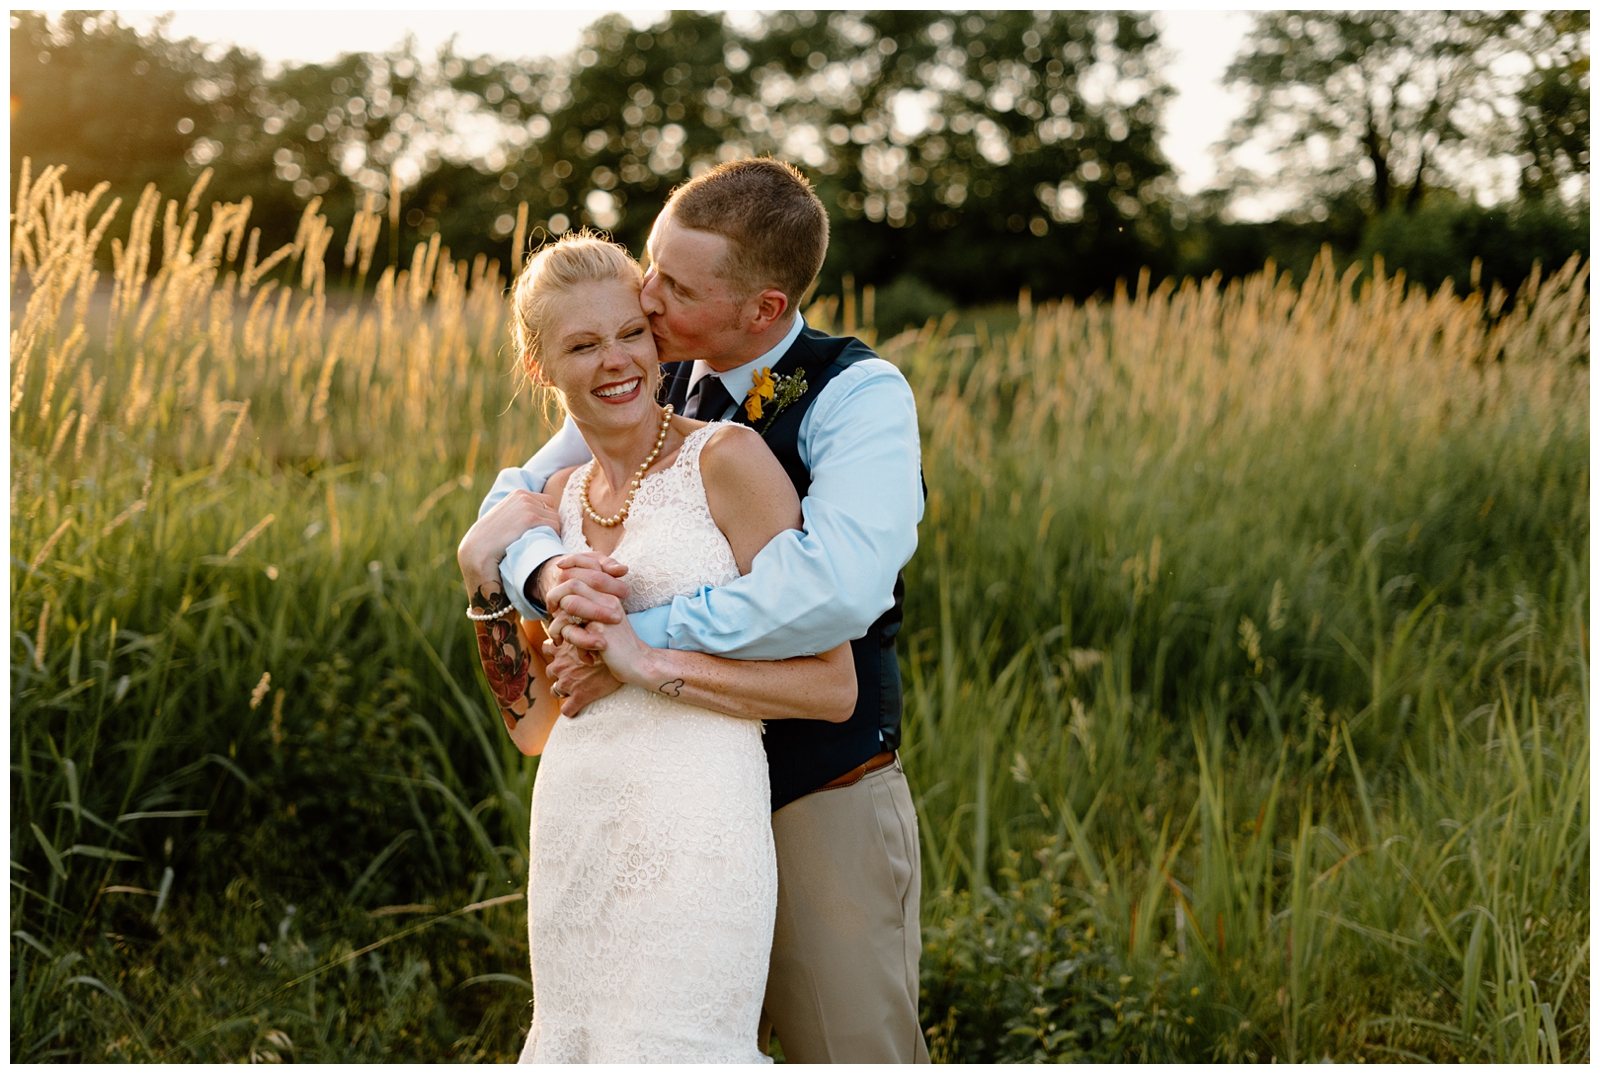 I'll show you how you can save money on an elopement... and have your dream day